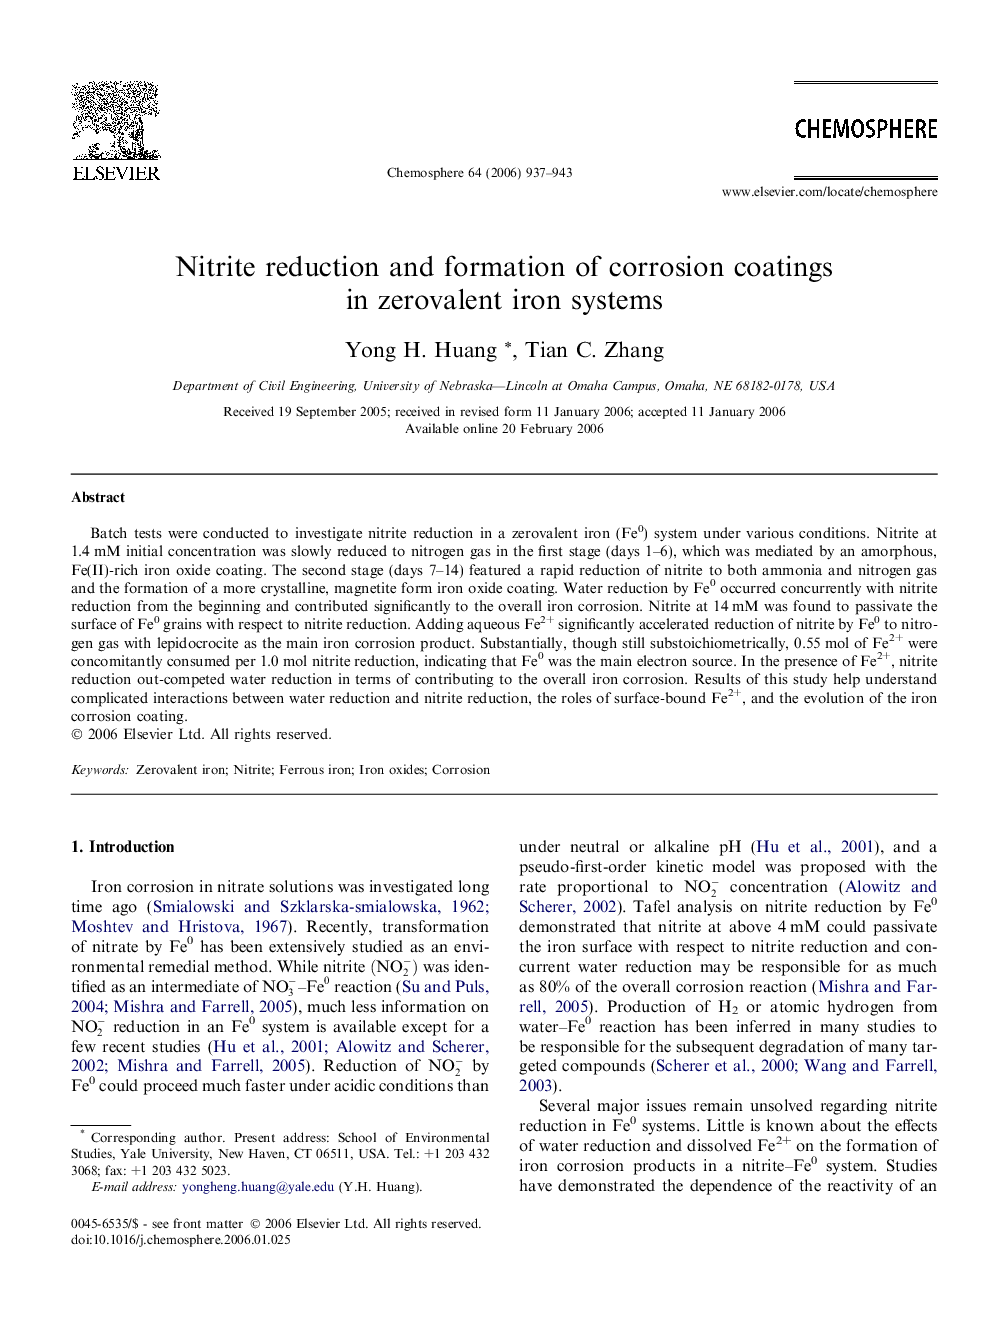 Nitrite reduction and formation of corrosion coatings in zerovalent iron systems